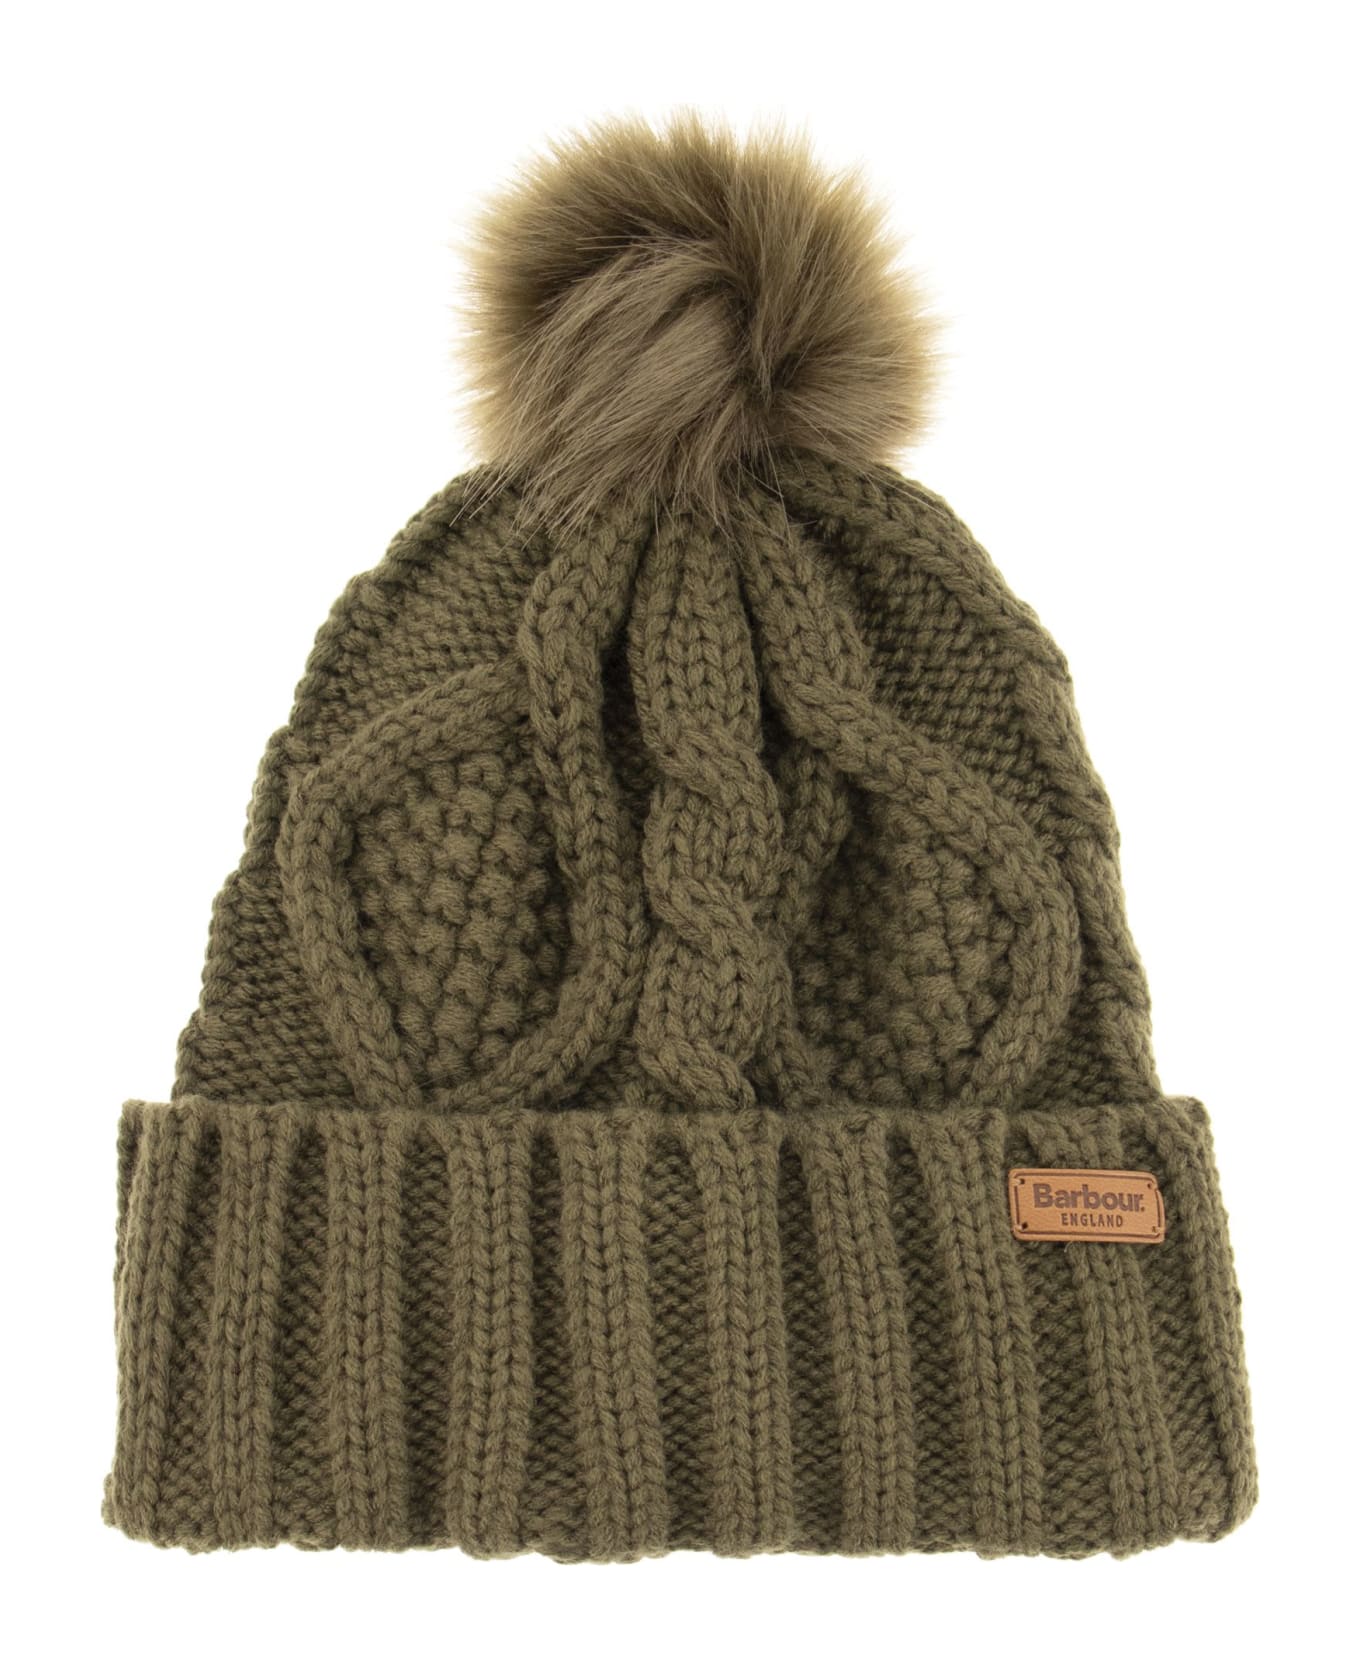 Barbour Ridley Cap And Scarf Set - Olive